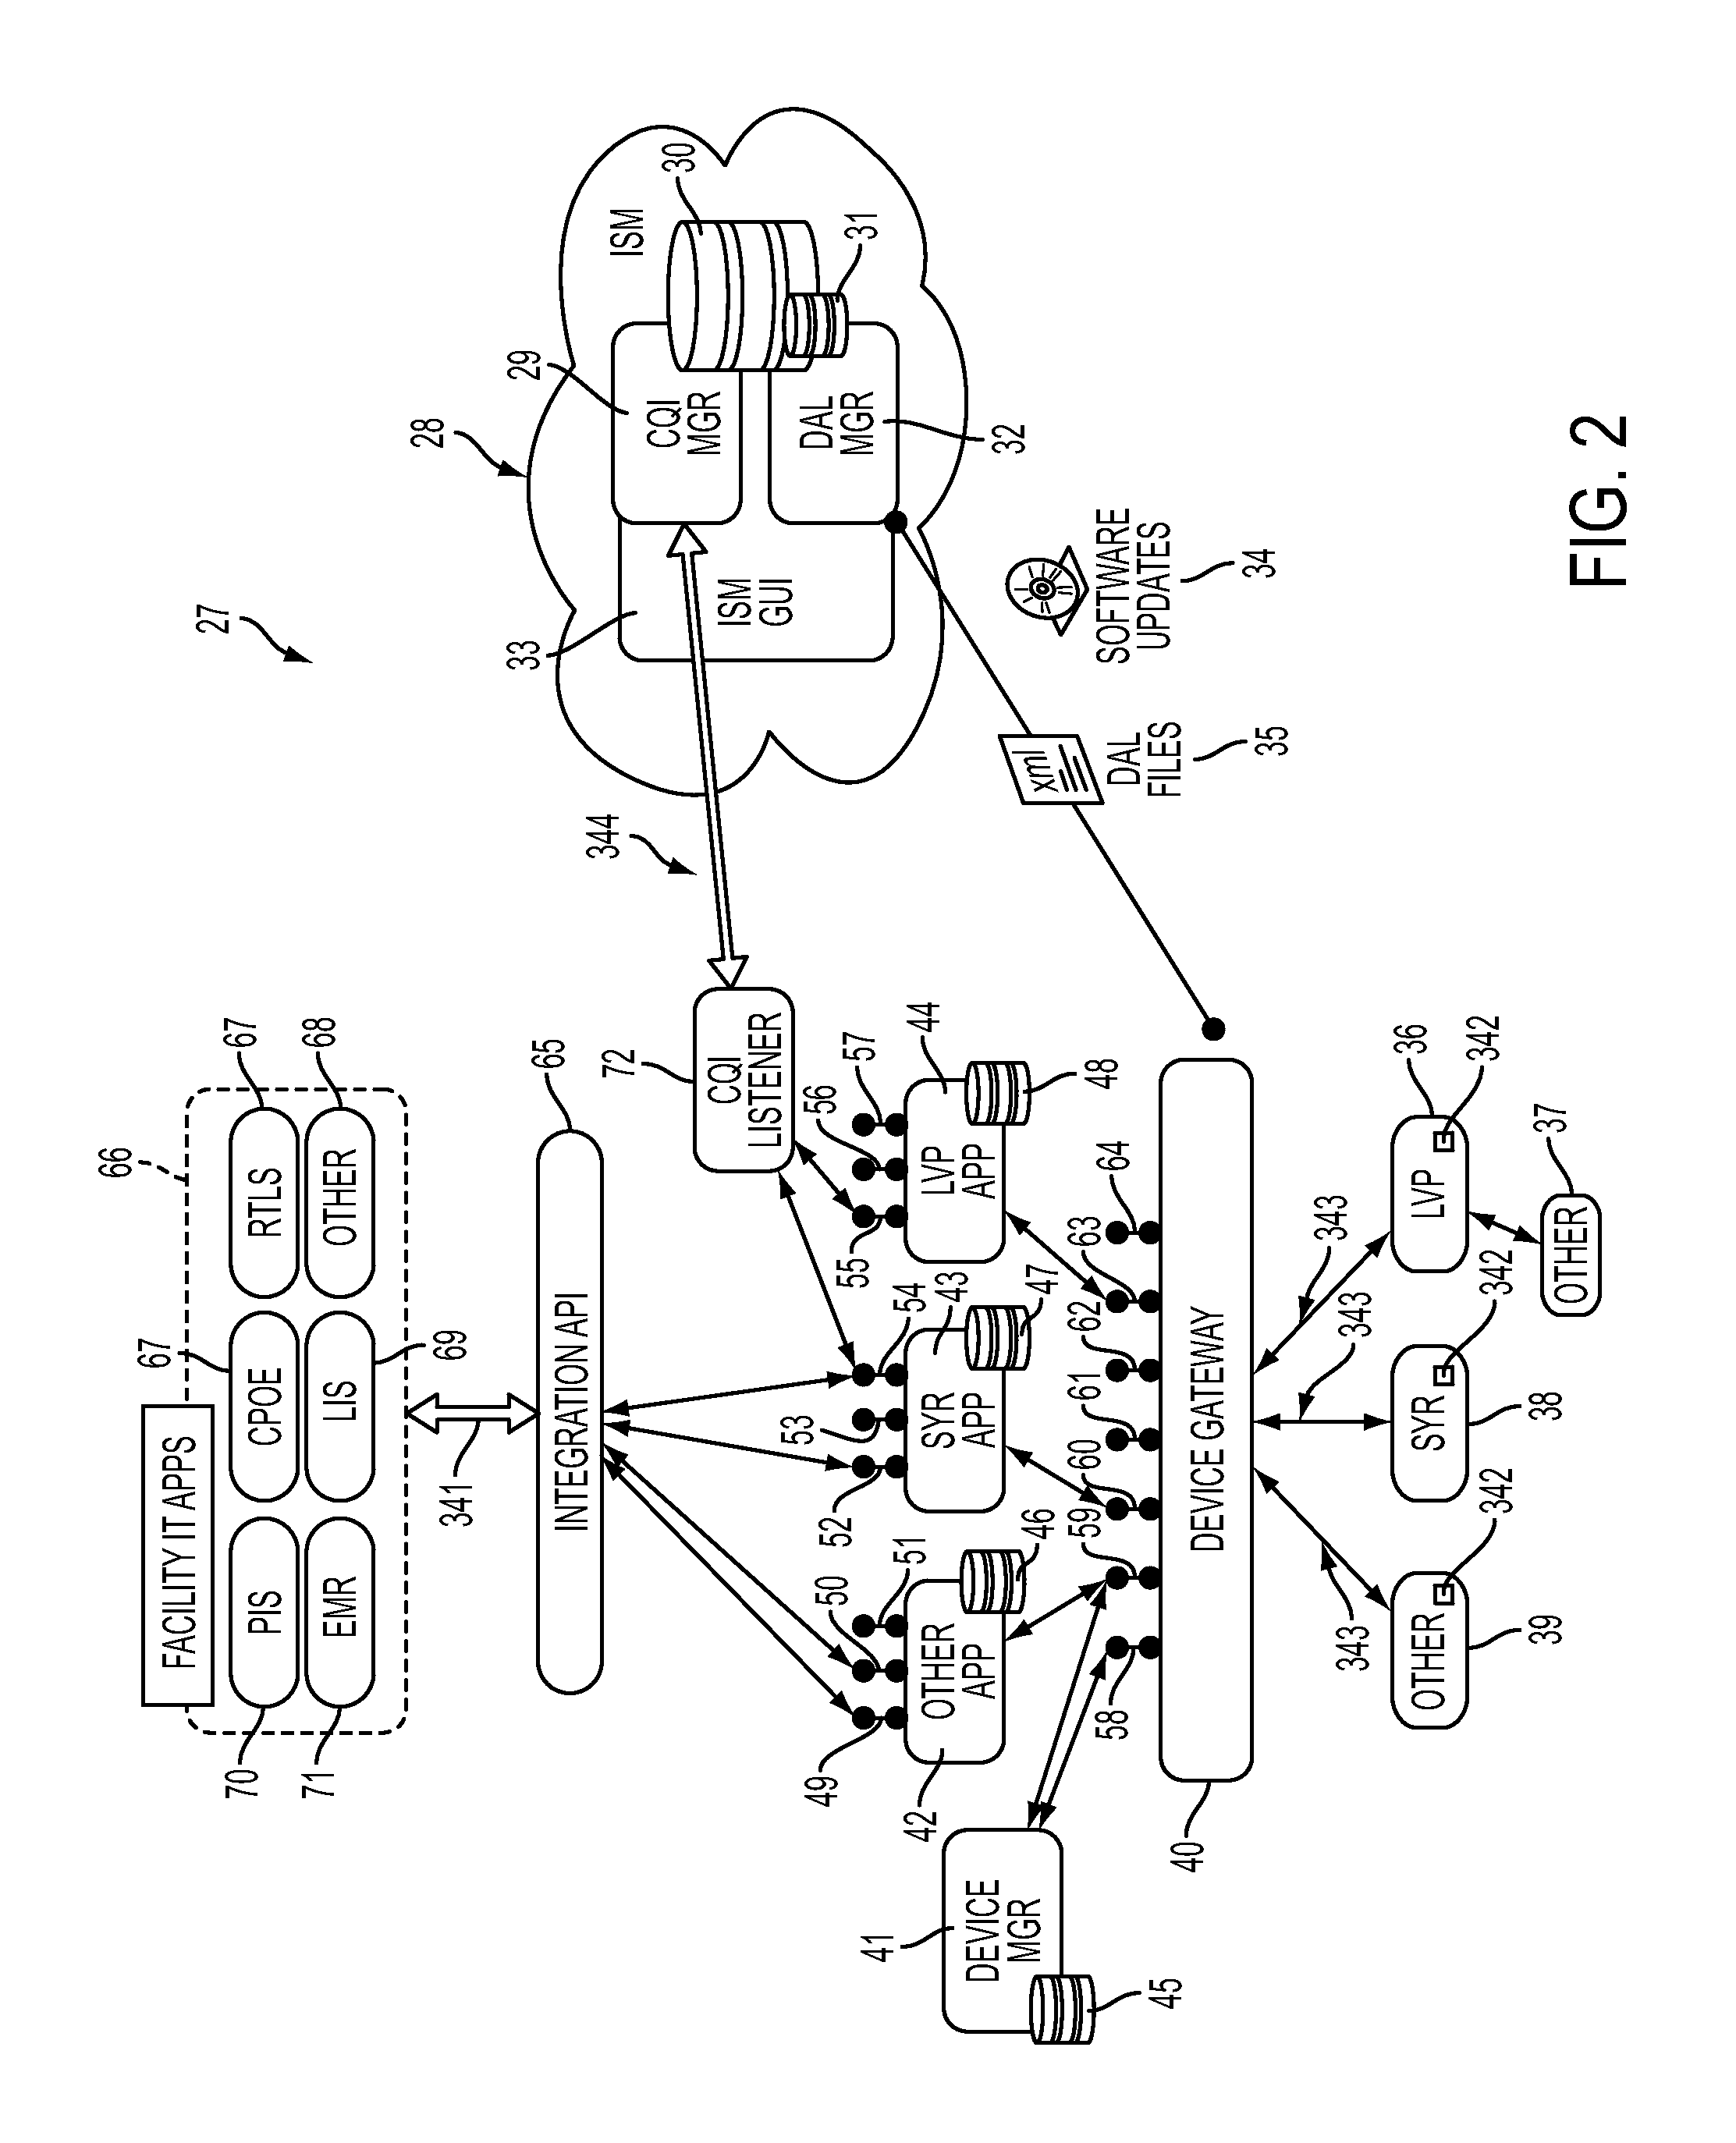 System and Apparatus for Electronic Patient Care